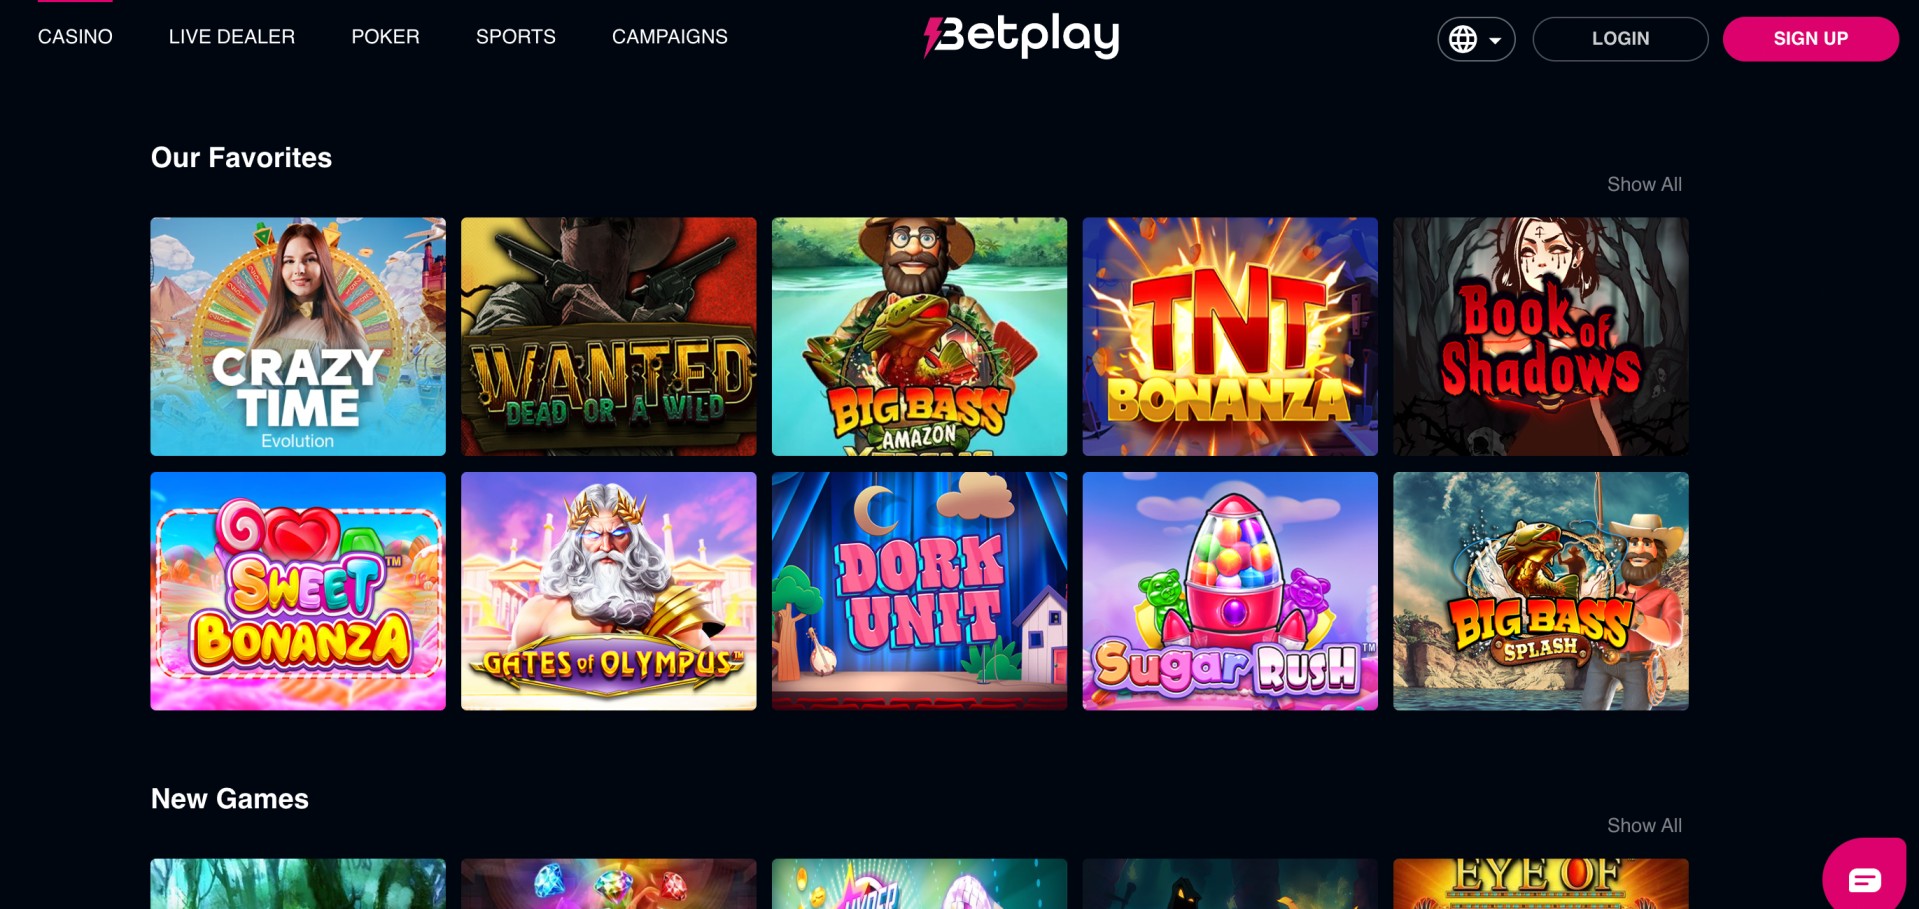 Betplay review 